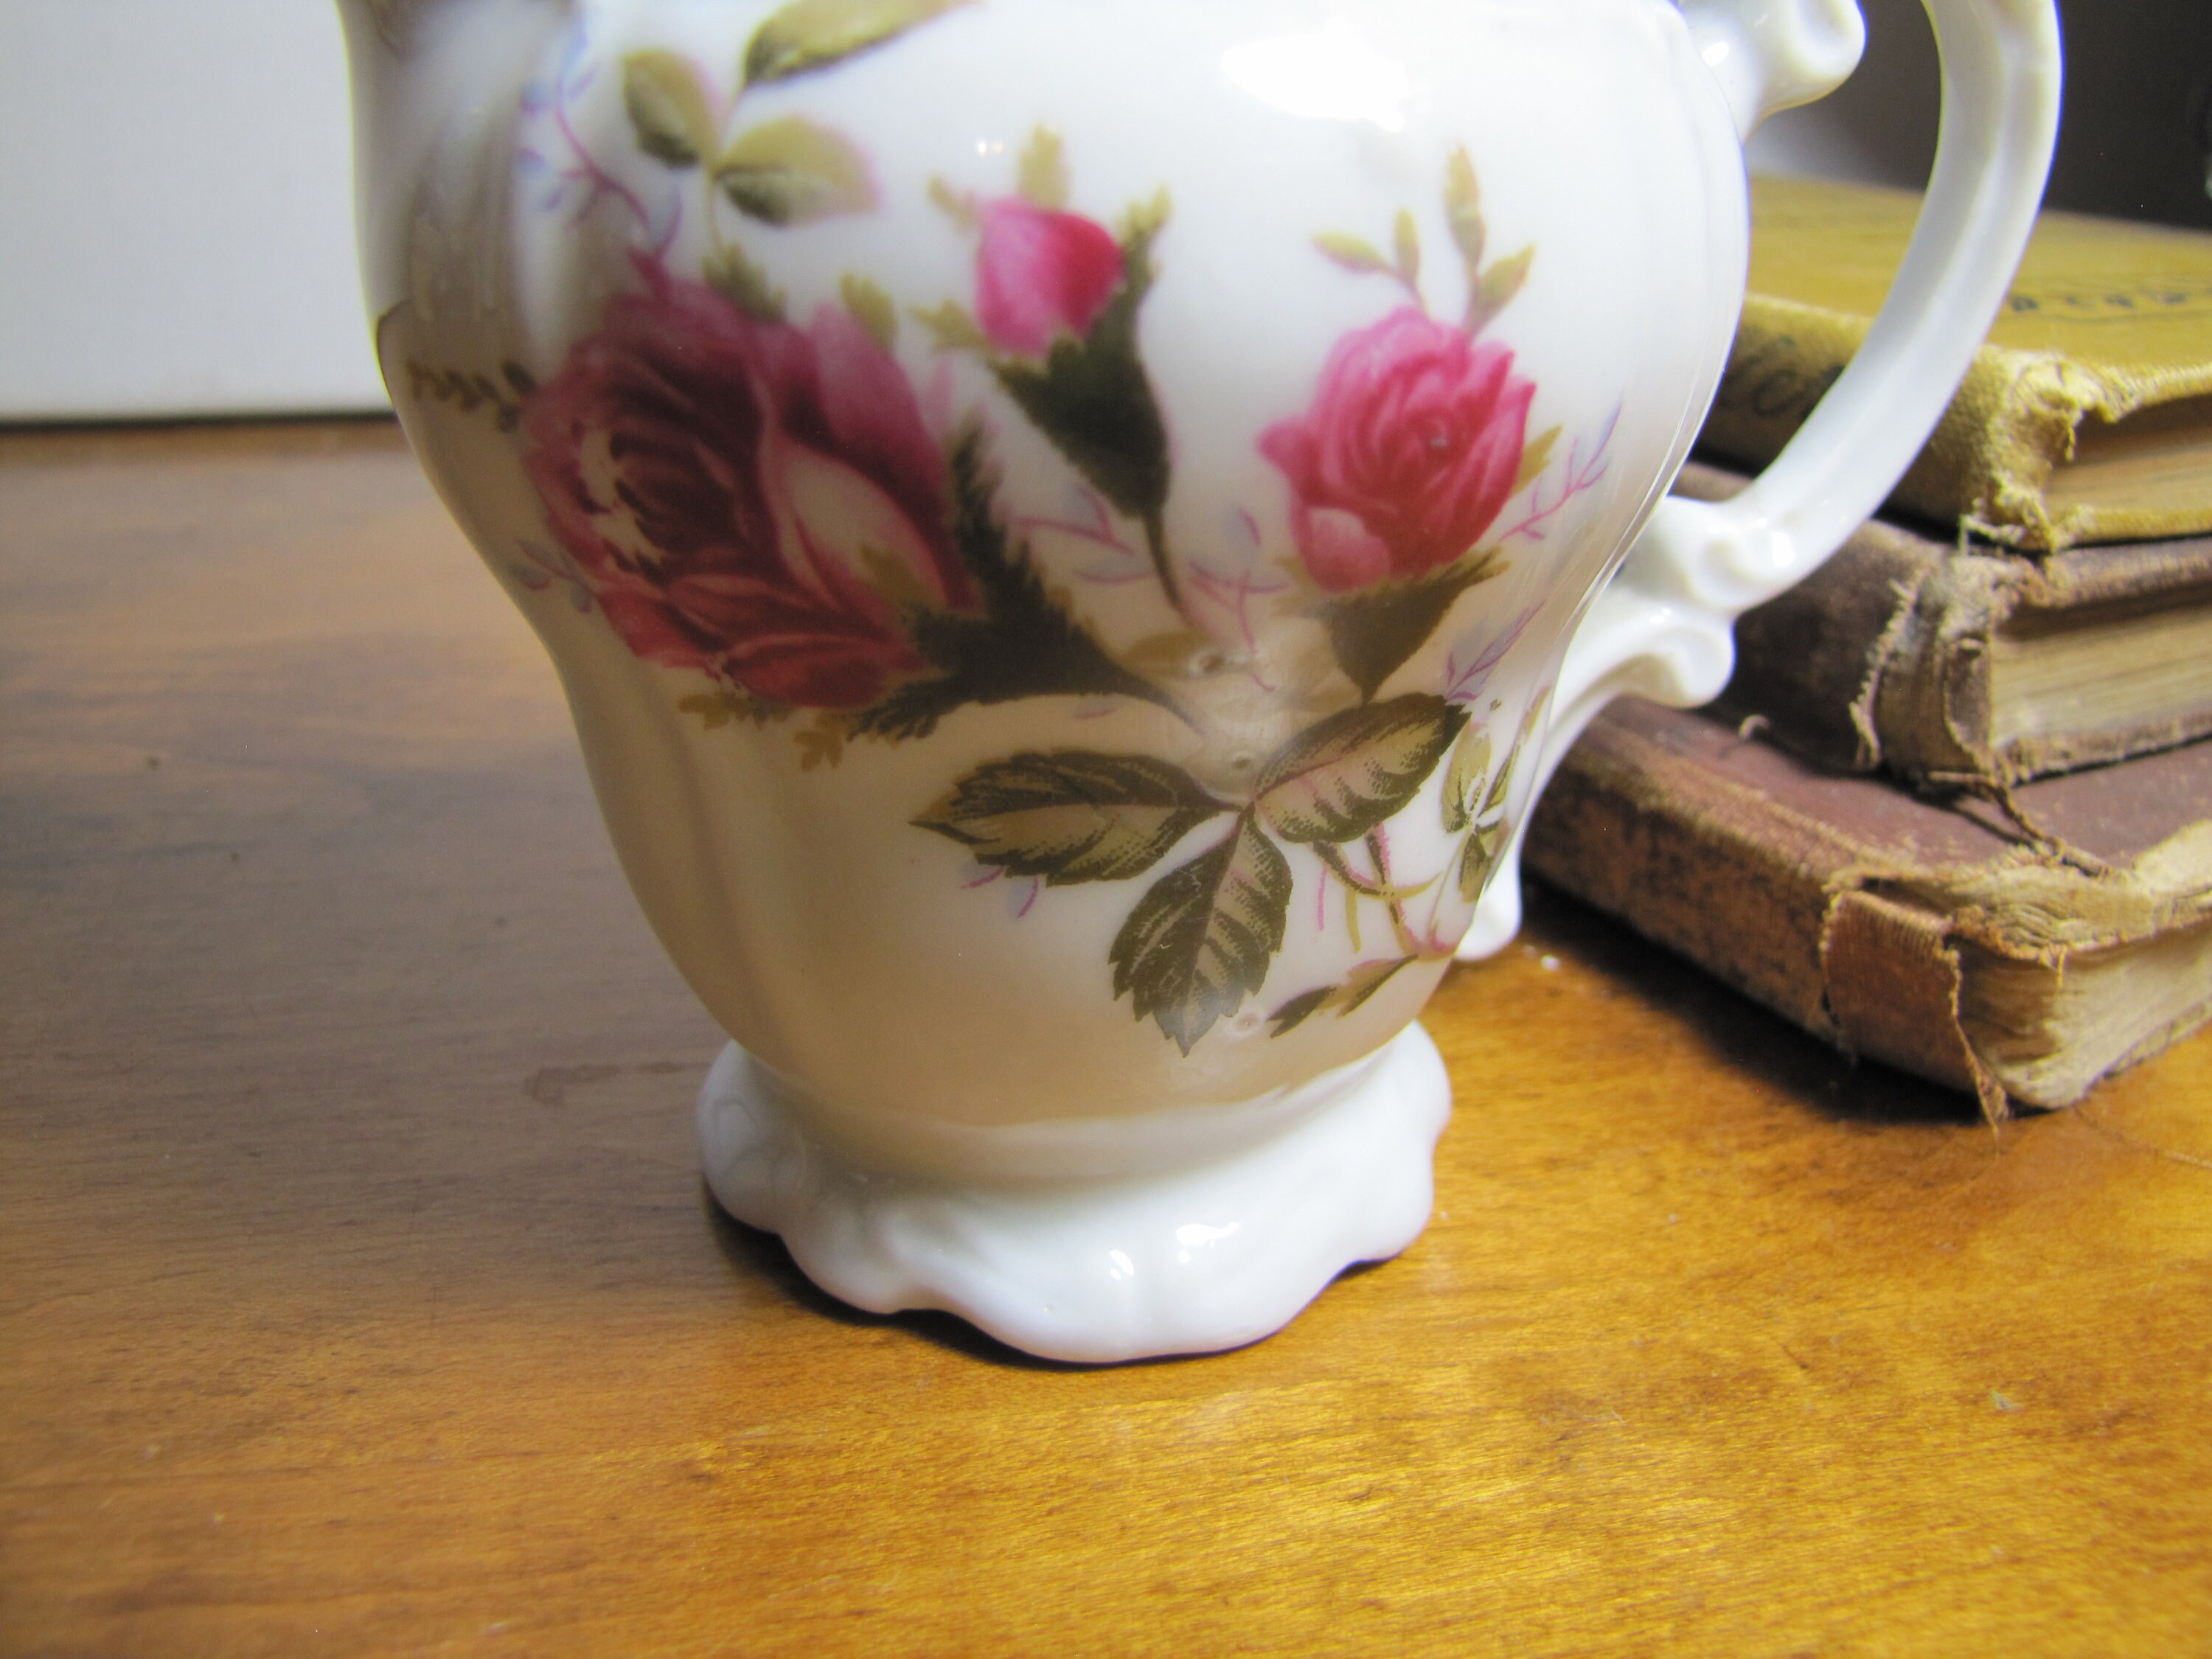 Small Porcelain Creamer Pink Rose and Rosebud Pattern Gold Accent